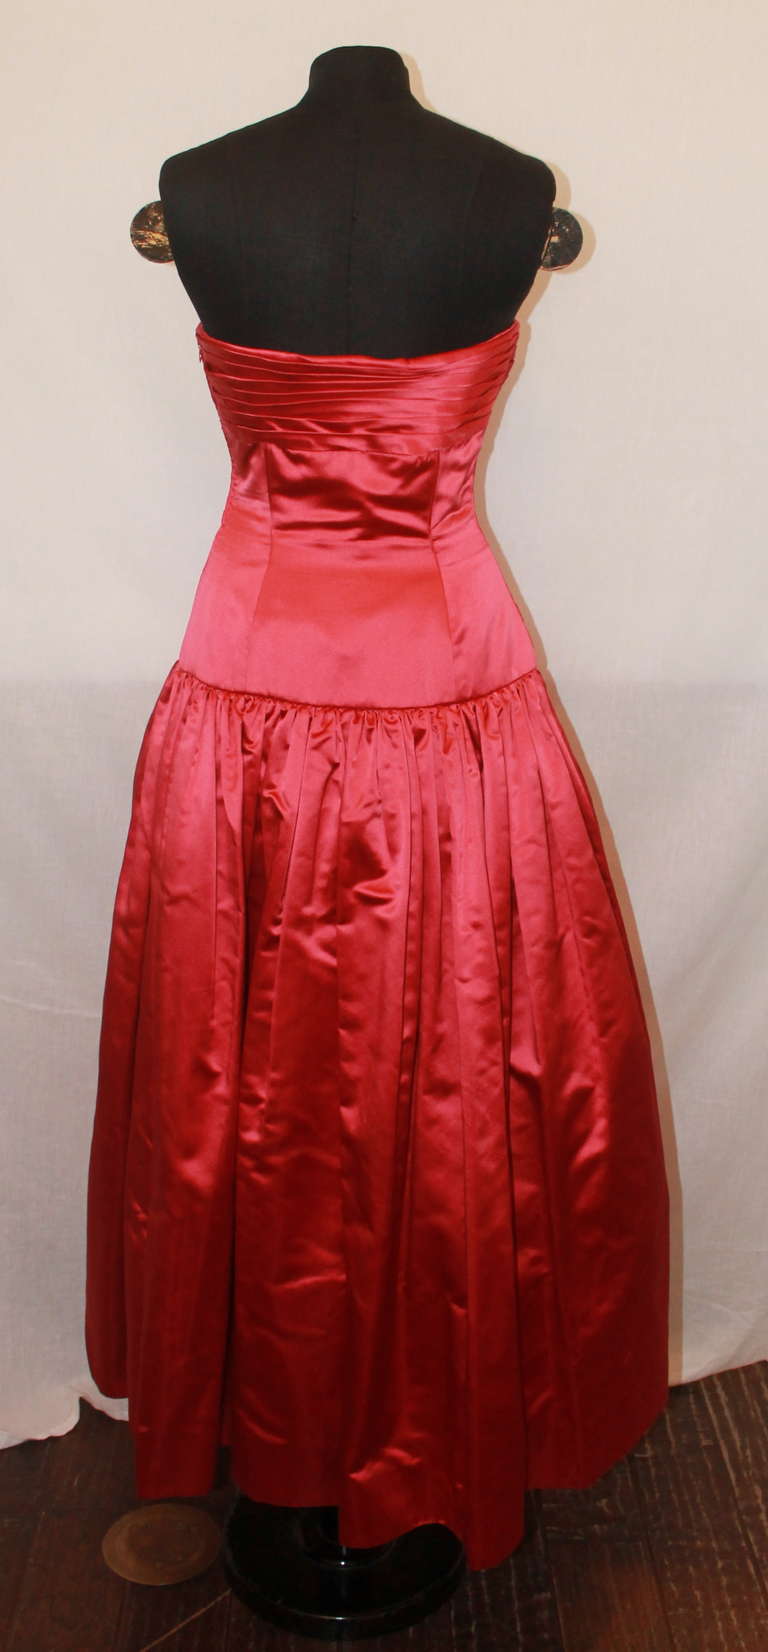 Women's Carolyn Roehm Red Satin Gown - 4